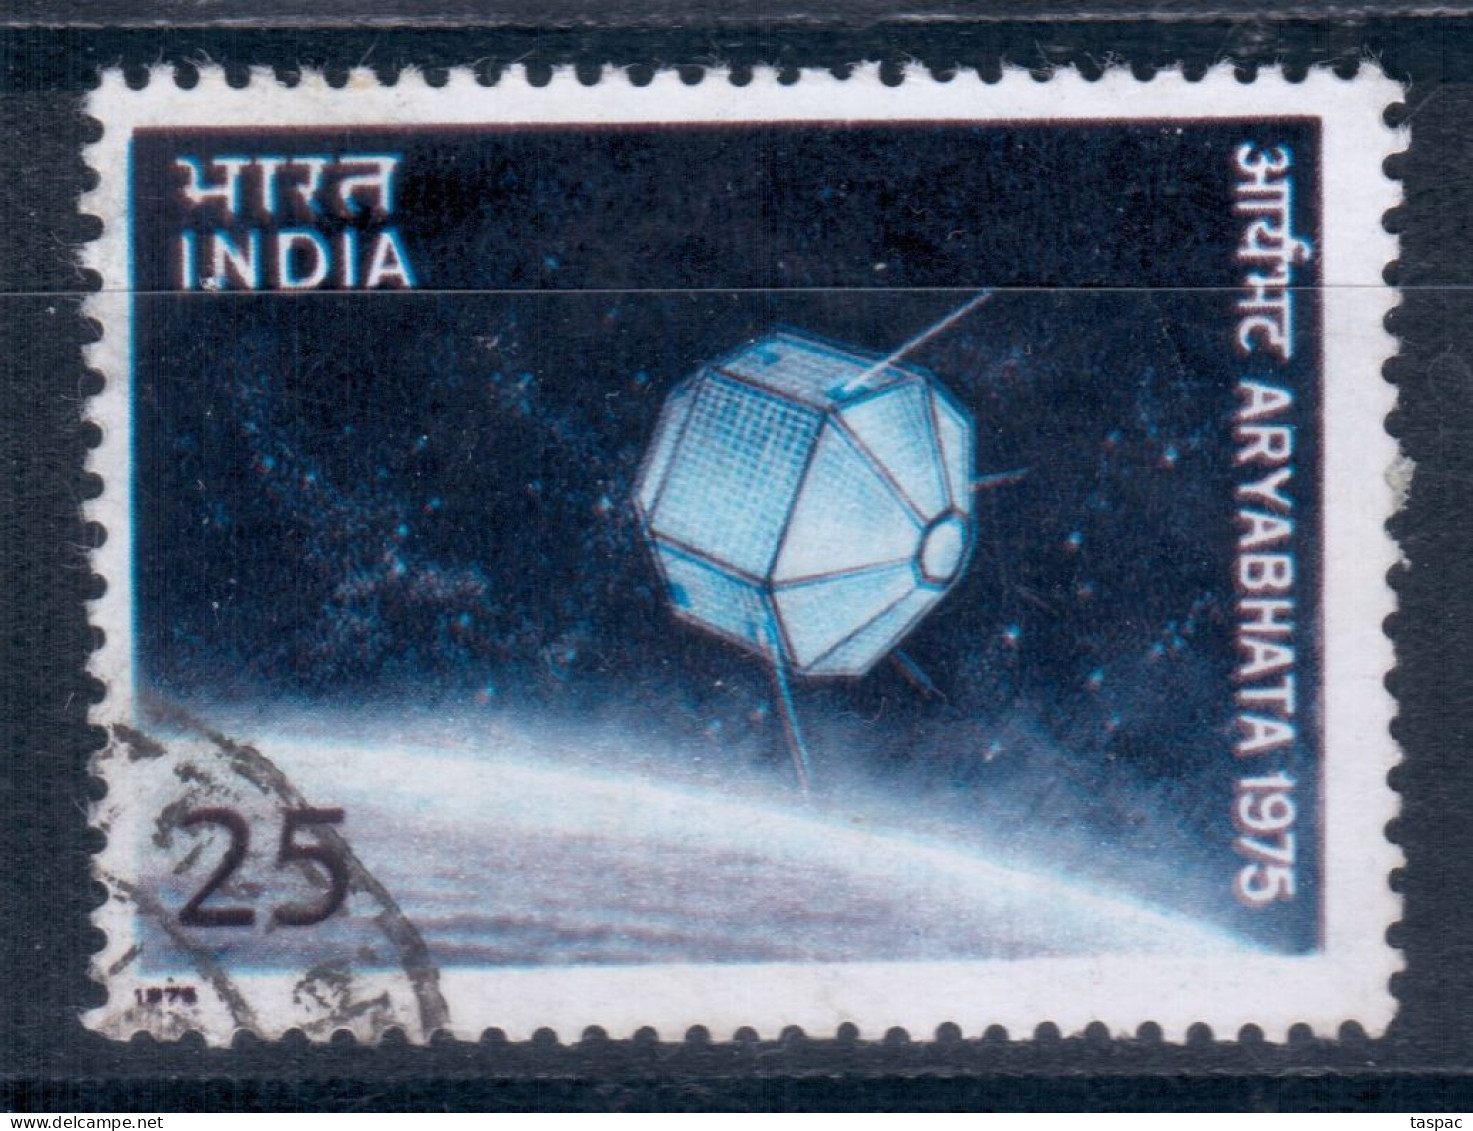 India 1975 Mi# 624 Used - Launching Of 1st Indian Satellite Aryabhata / Space - Oblitérés